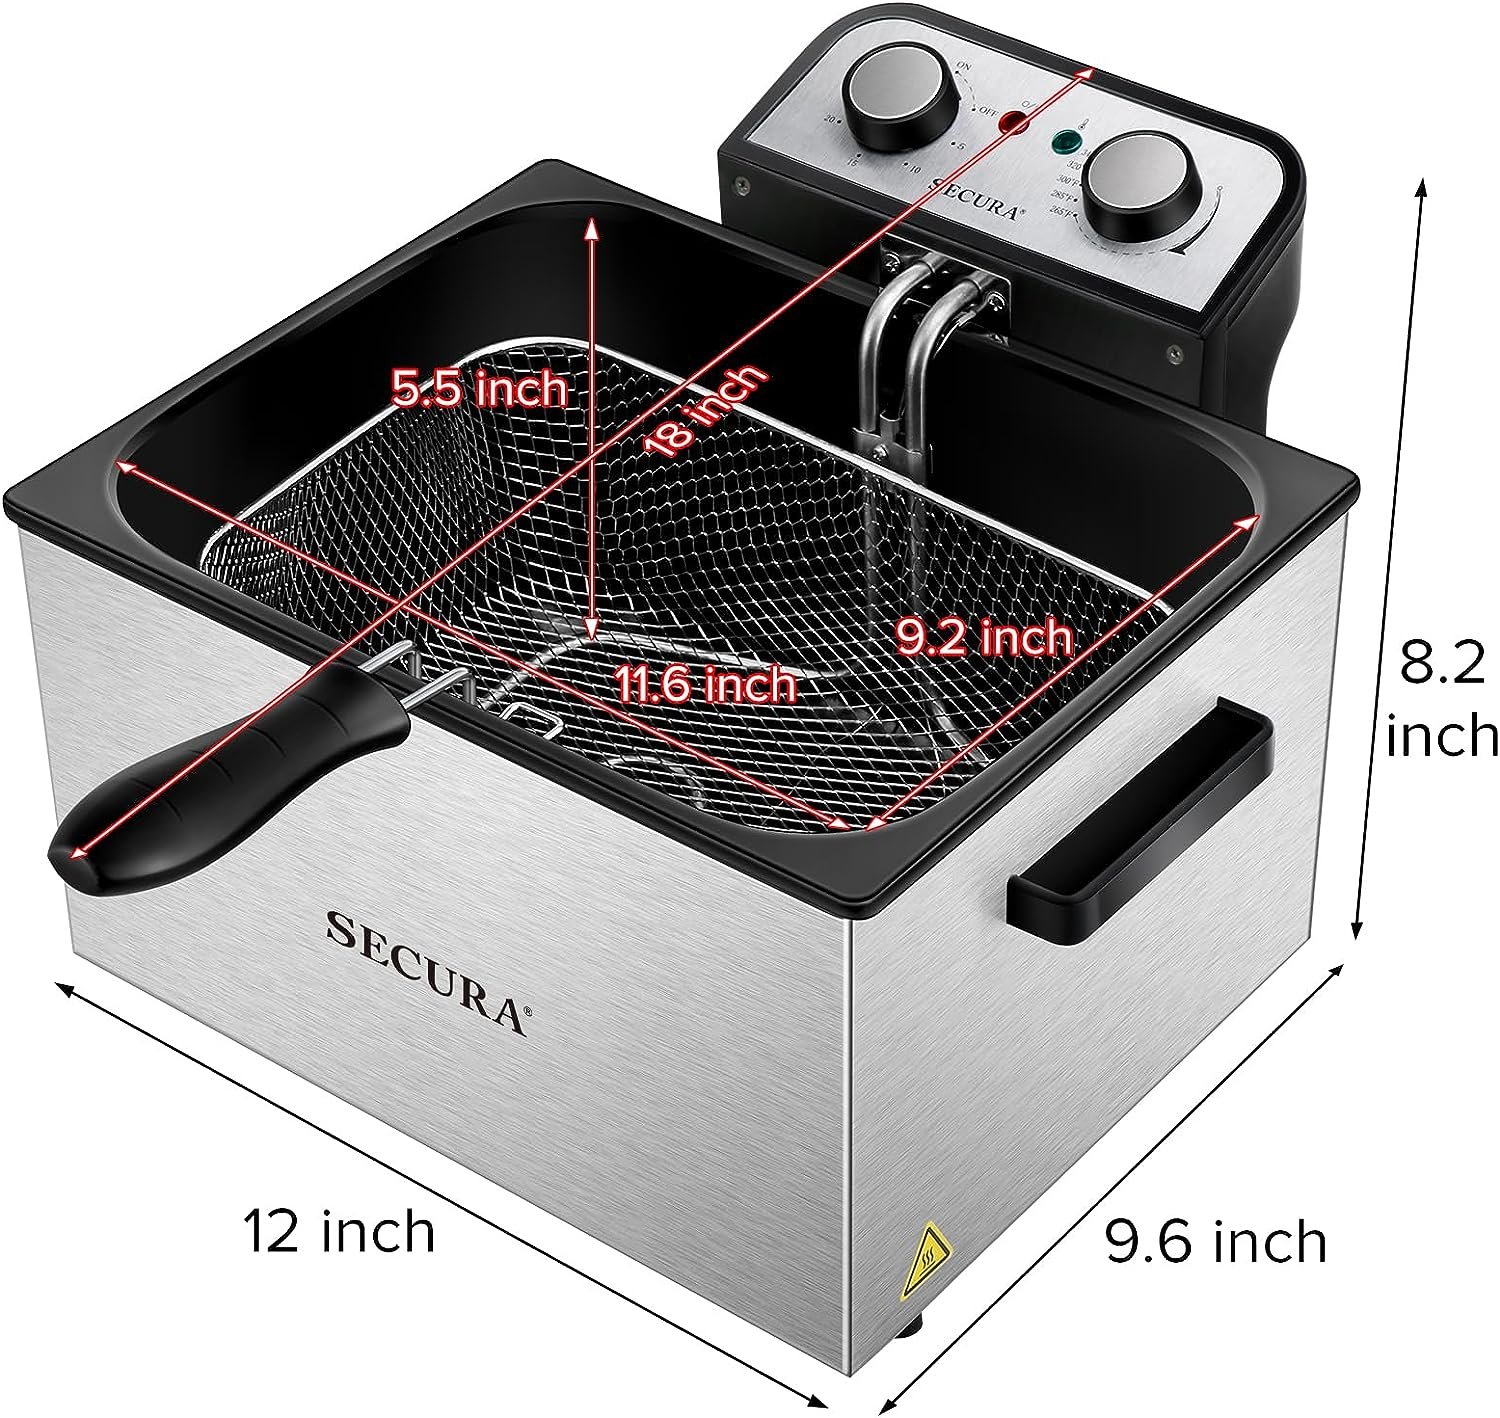 Secura Electric Deep Fryer 1800W-Watt Large 4.0L/4.2Qt Professional Grade Stainless Steel with Triple Basket and Timer,Gray